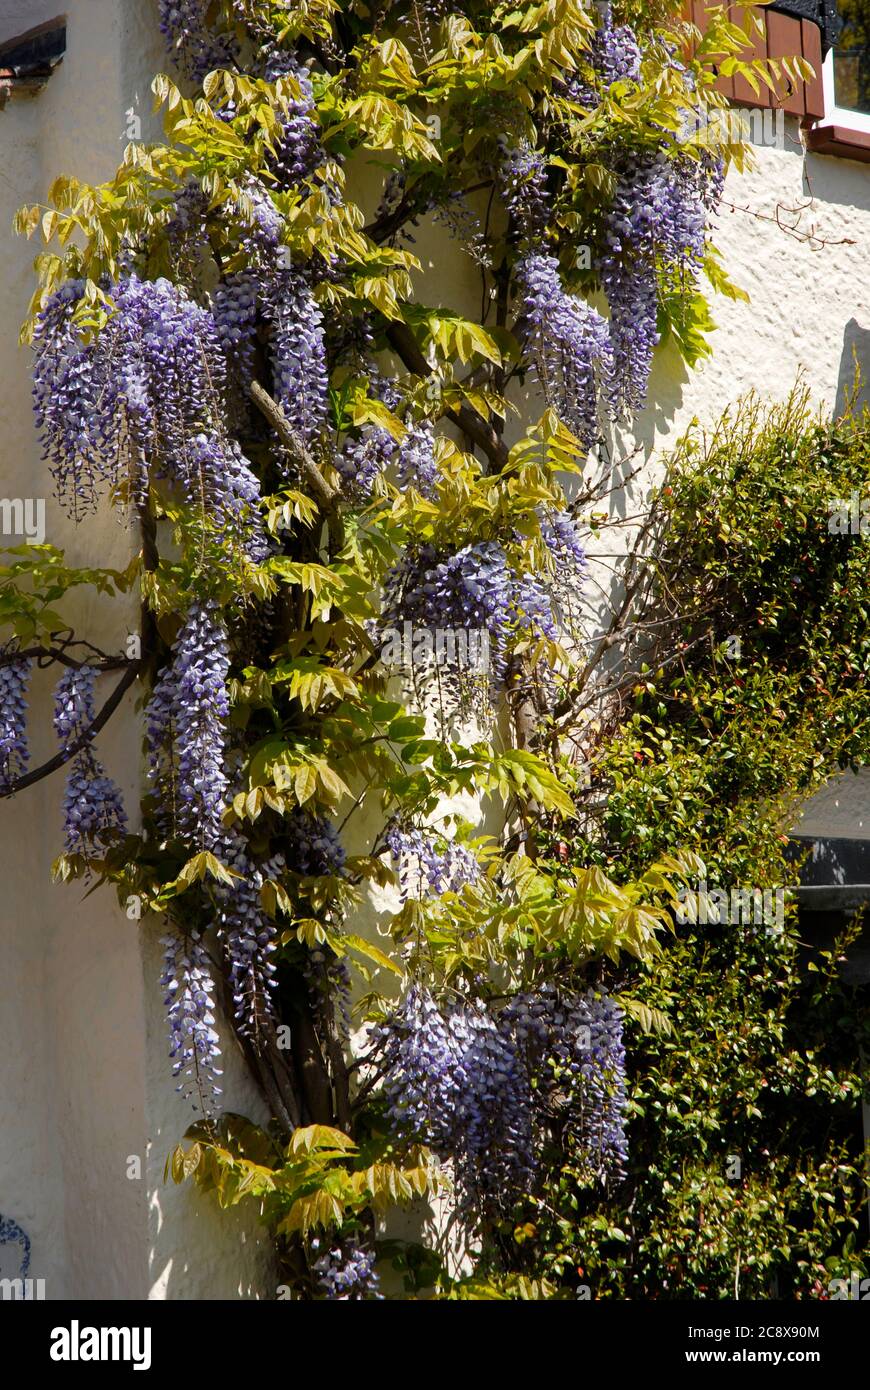 Attractive Wisteria growing in wall of domestic house, Kent, England Stock Photo